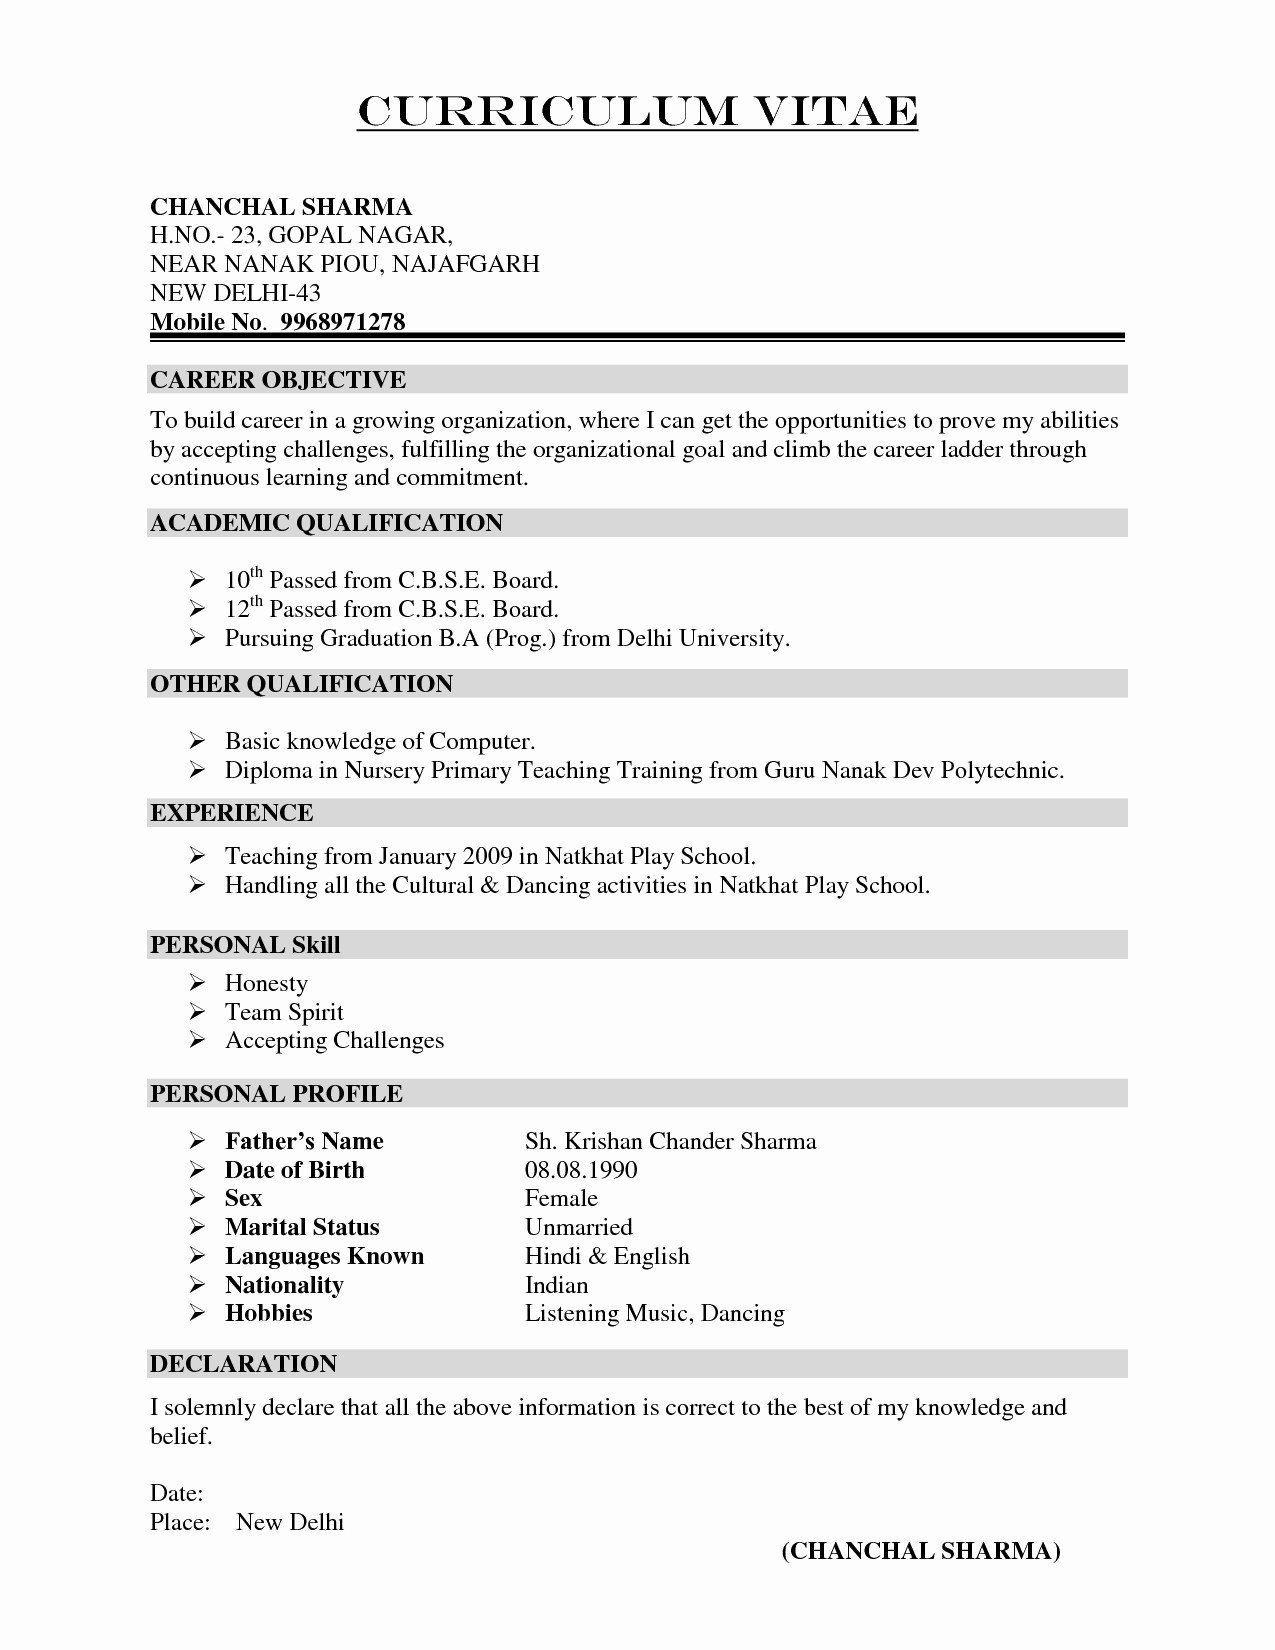 ema cover letter template Collection-New Resume Cover Letter formatted Resume 0d Email Resume Cover resume writing examples 20-s